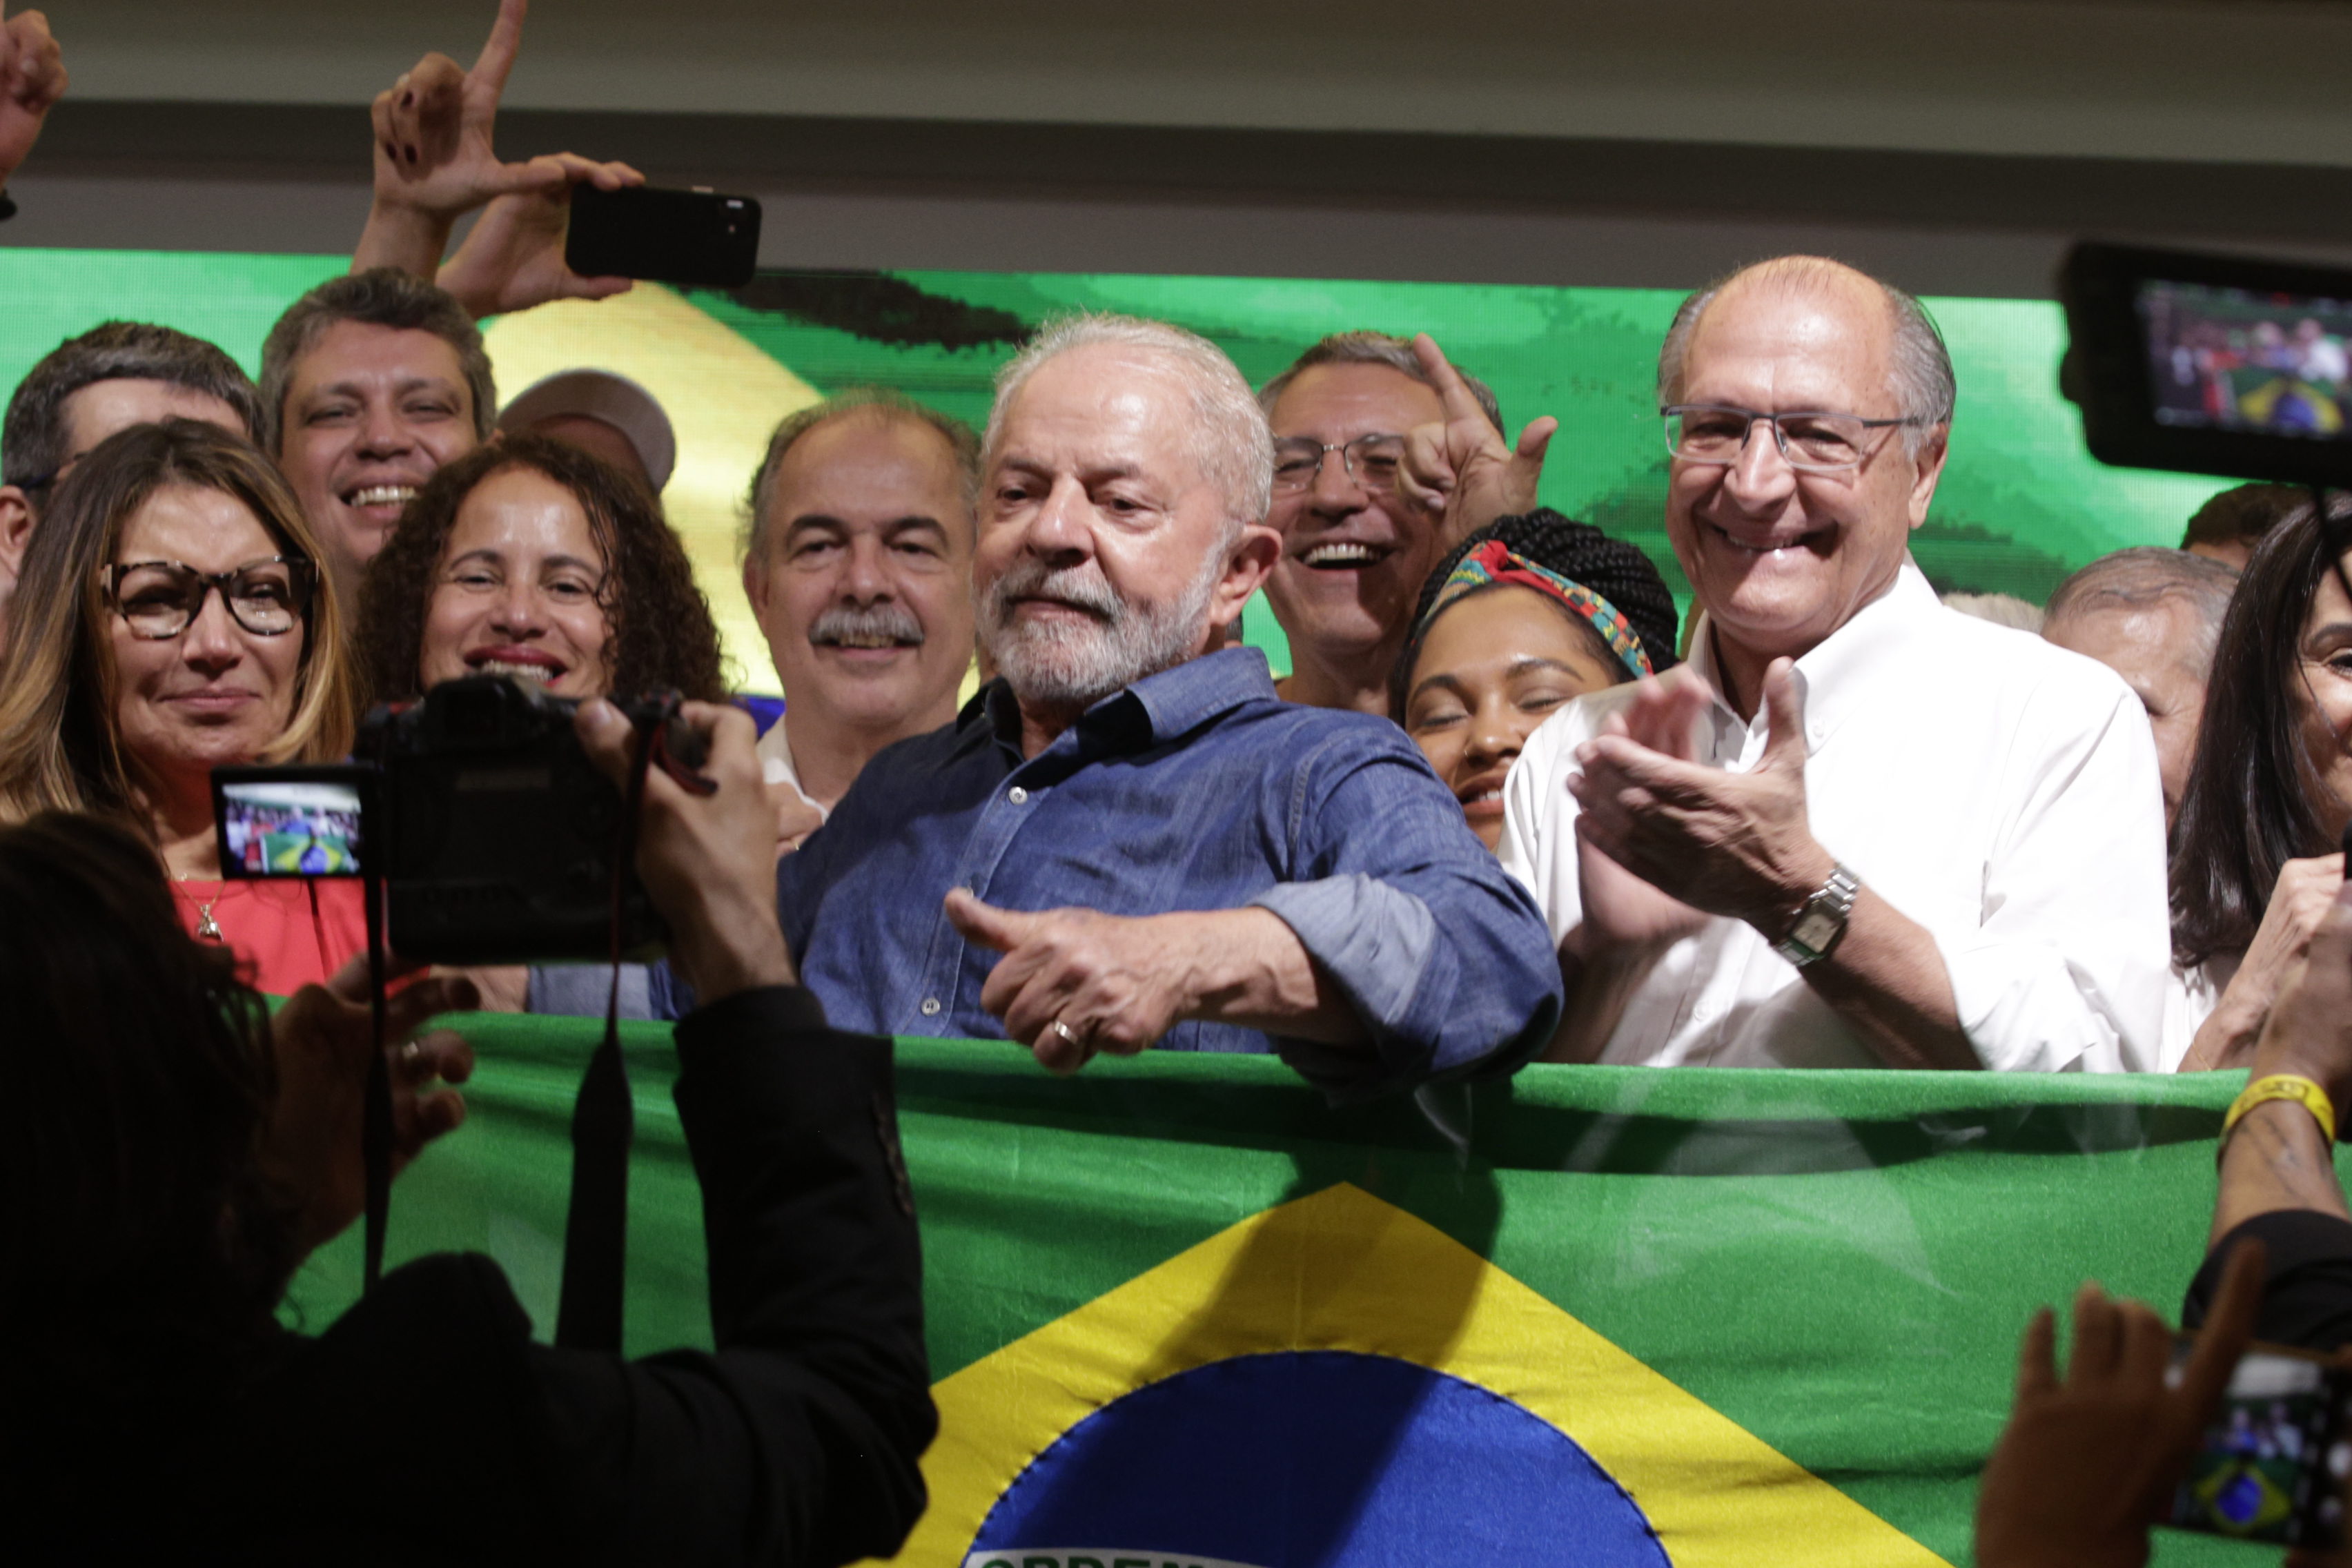 What the Bolsonaro-Lula Runoff Will Mean for Brazil: QuickTake - Bloomberg